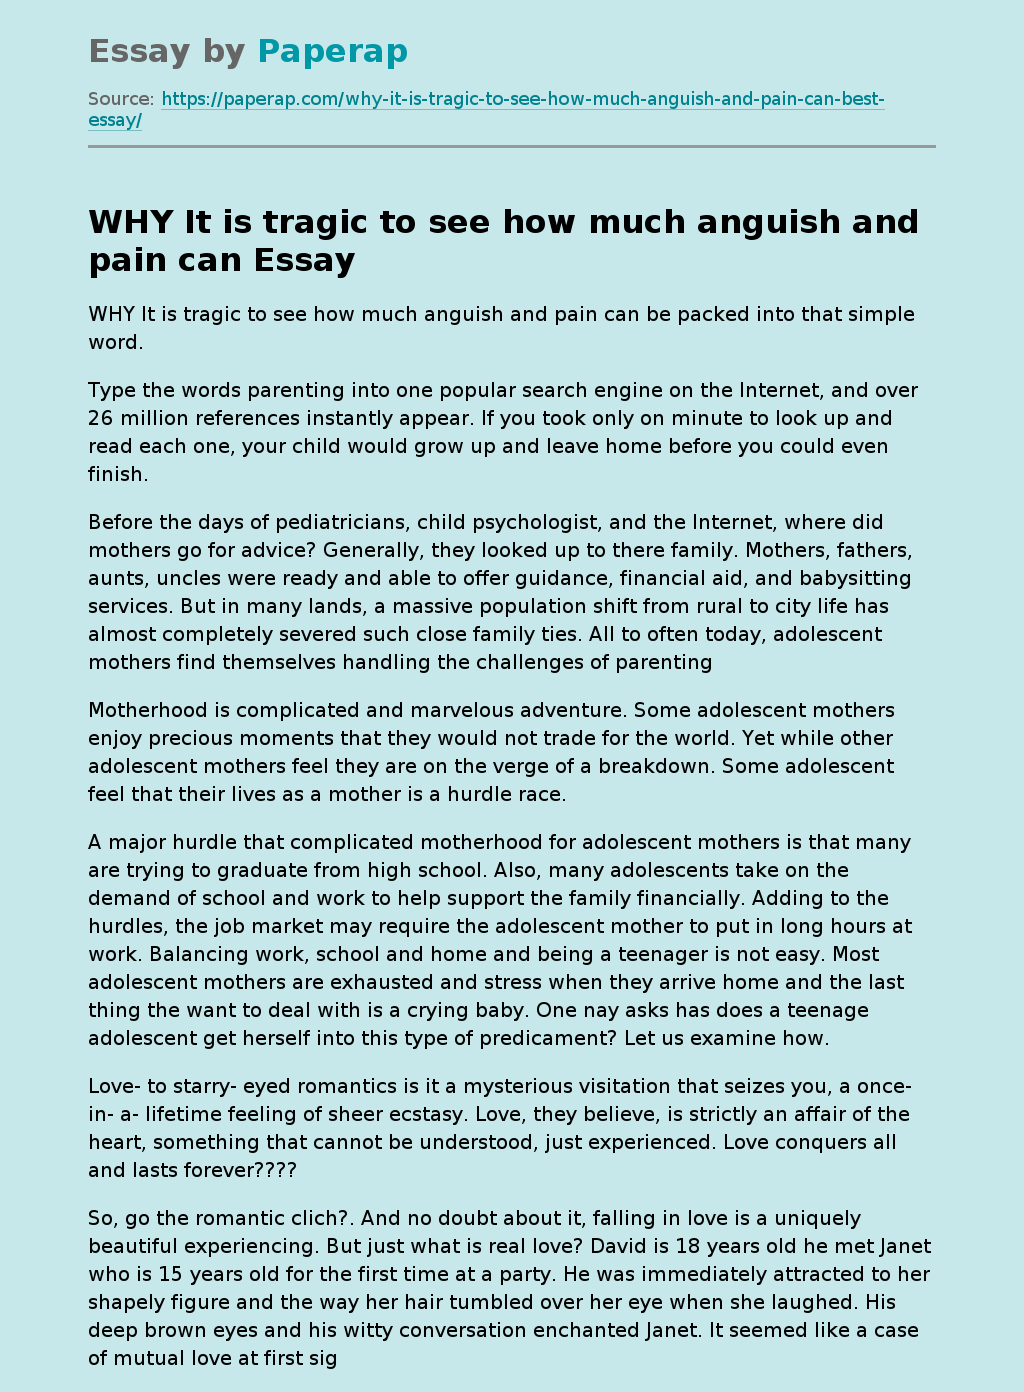 WHY It is tragic to see how much anguish and pain can